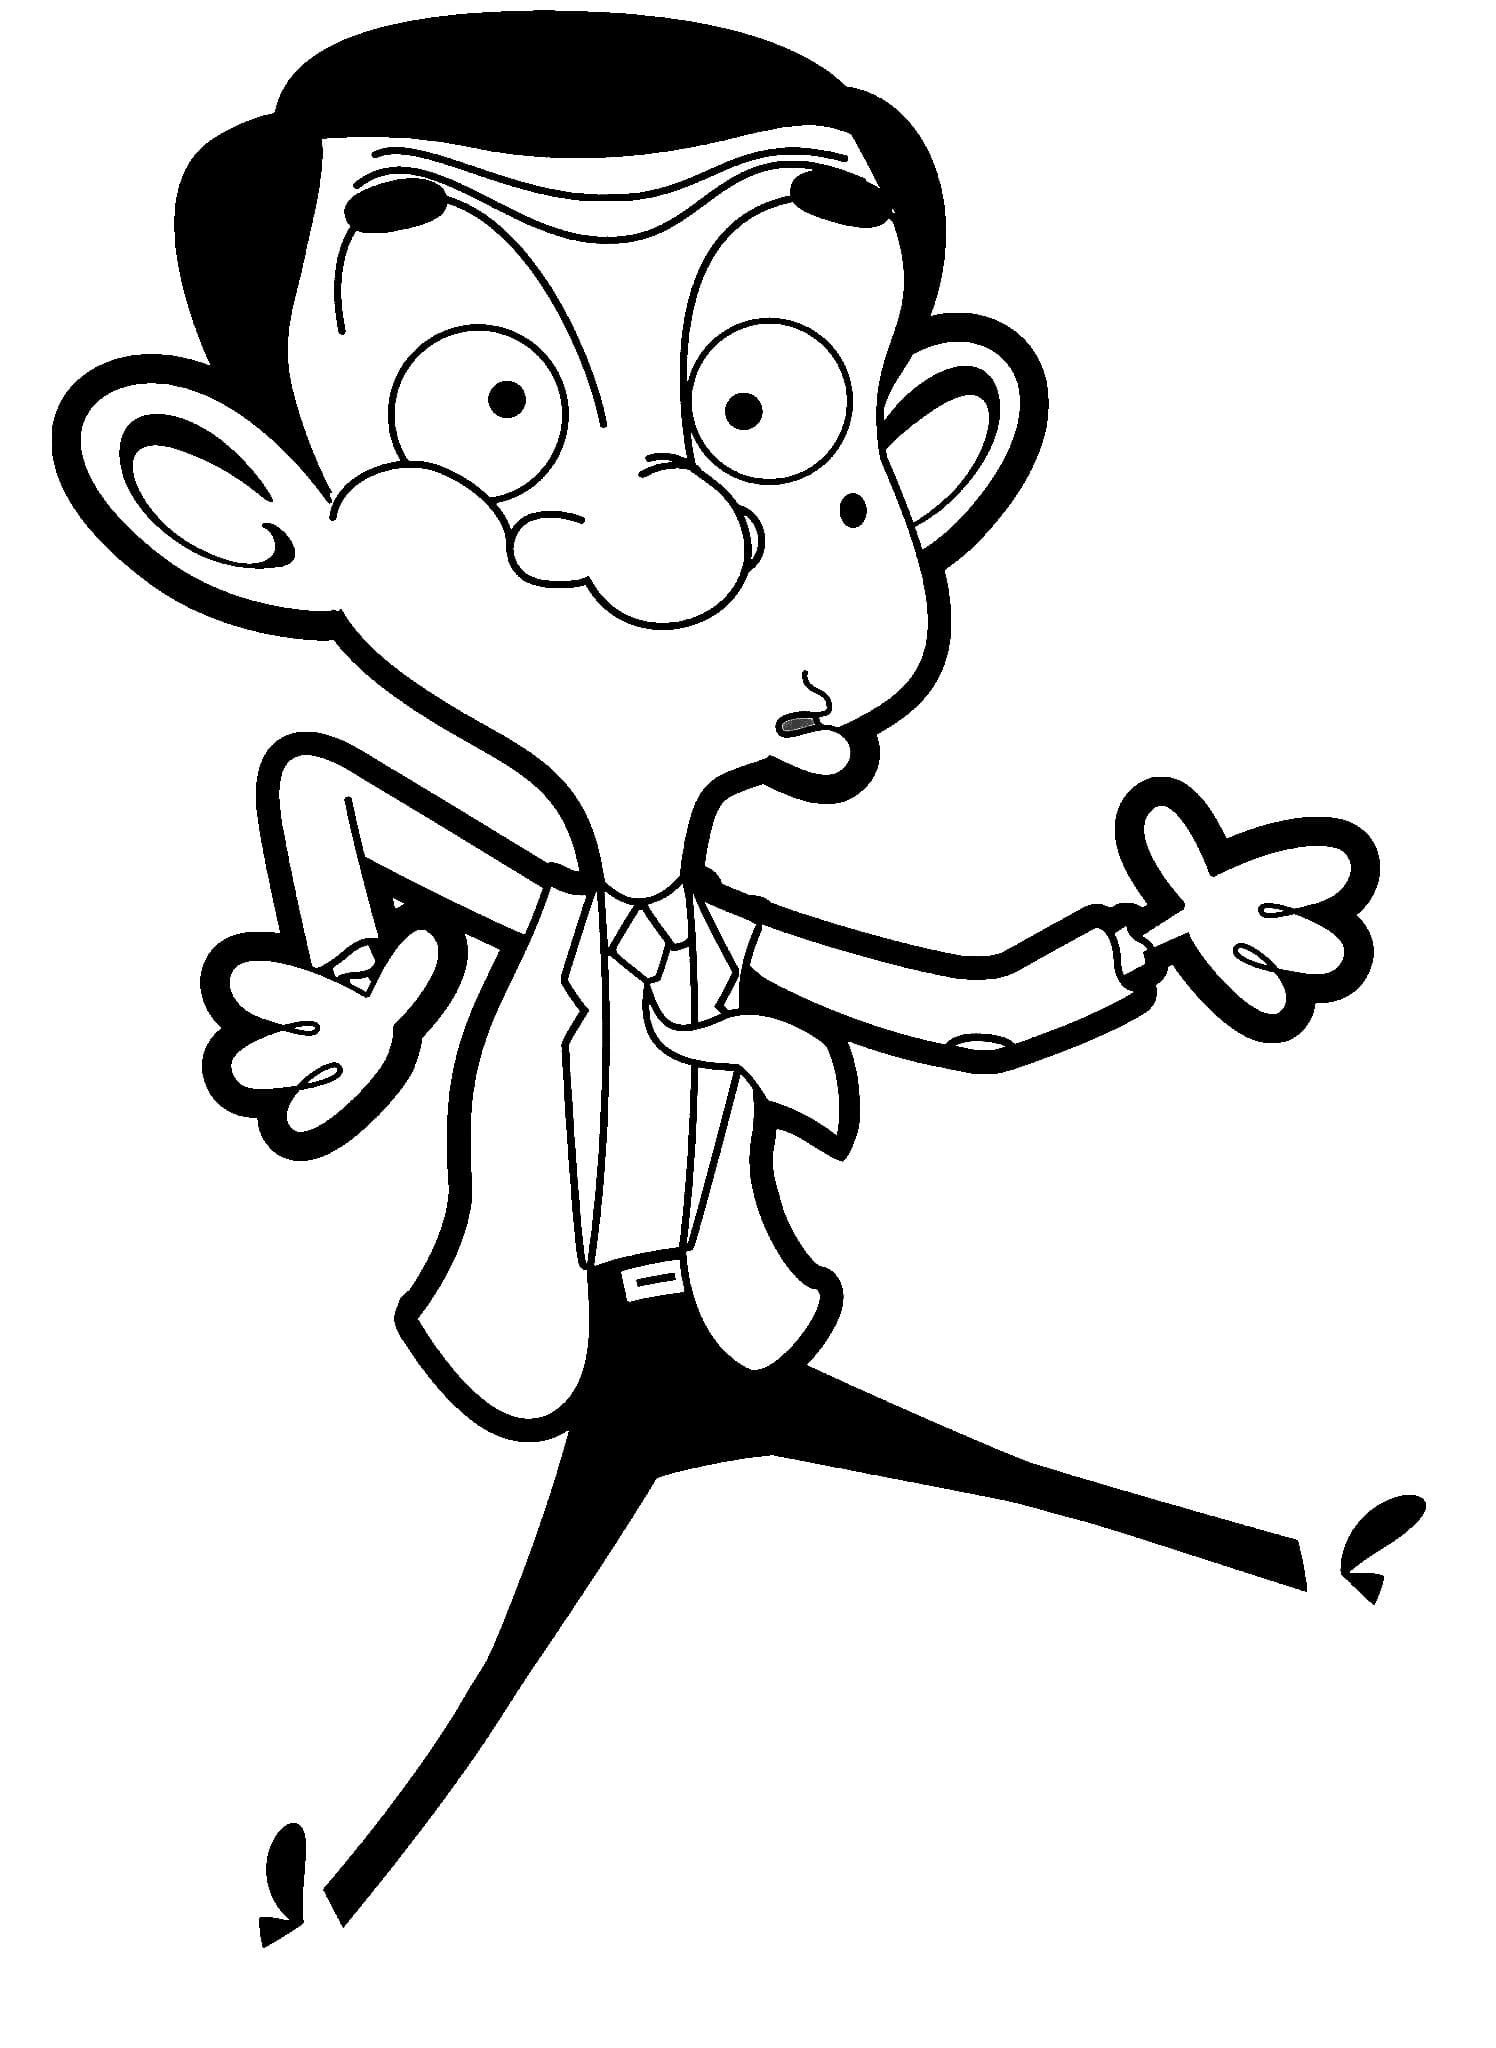 Silly Mr Bean coloring page - Download, Print or Color Online for Free